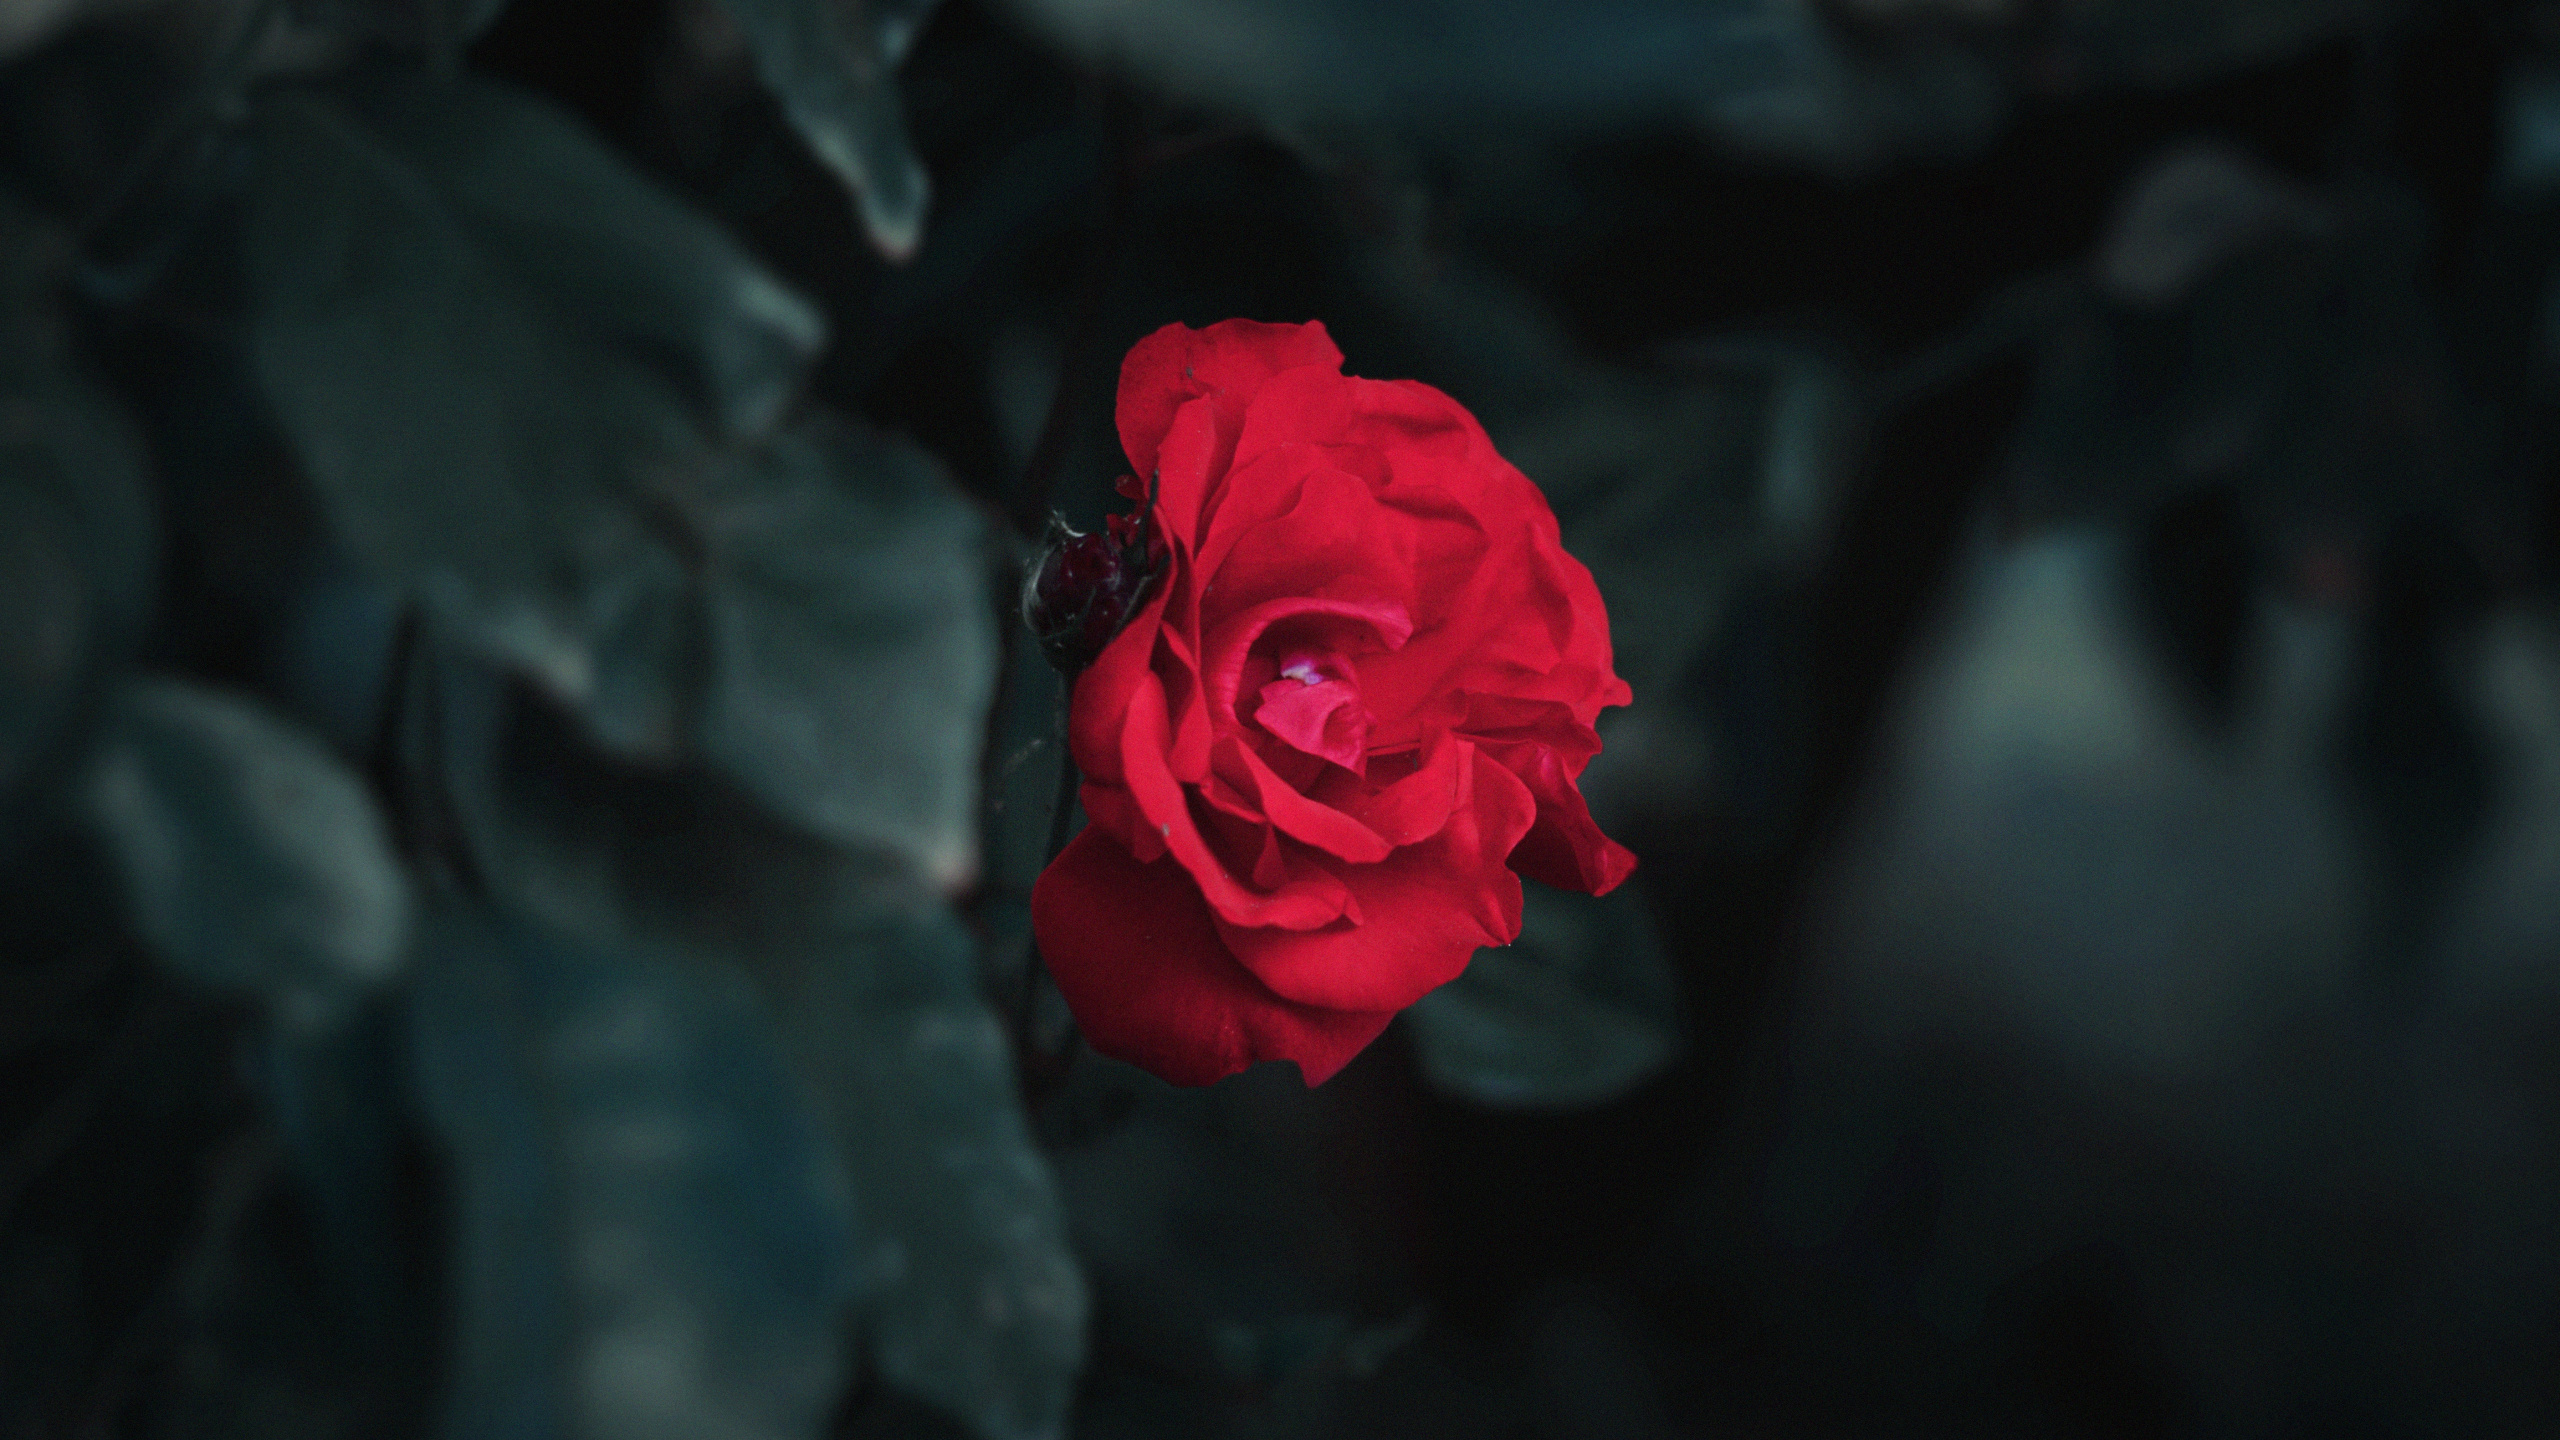 Red Rose in Close up Photography. Wallpaper in 2560x1440 Resolution